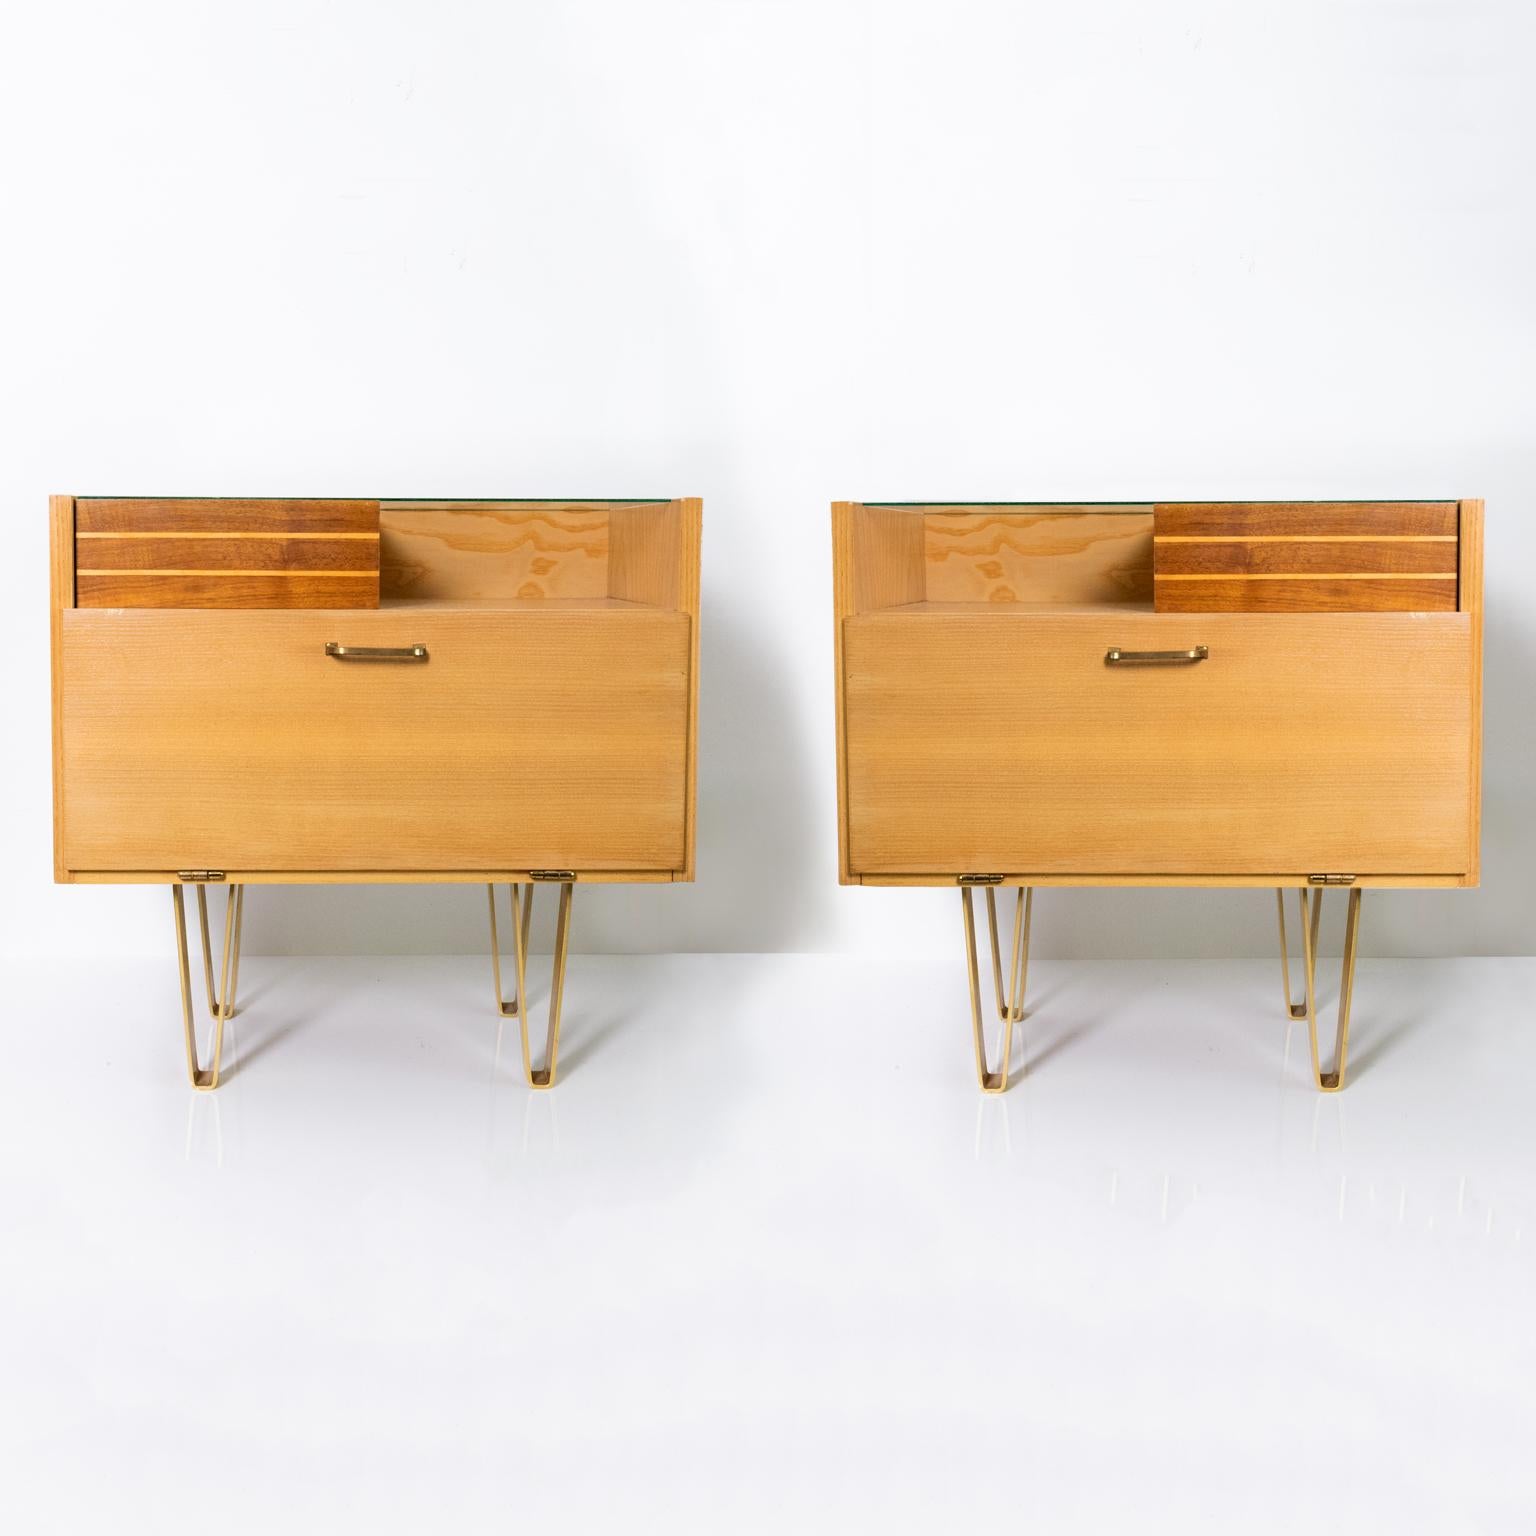 Pair of Scandinavian Modern nightstands in a pale elmwood detailed with solid teak. Each cabinet has a single pull out drawer and a drop door compartment. The legs are plated matte brass in “V” form. Very good original condition, maker unknown circa